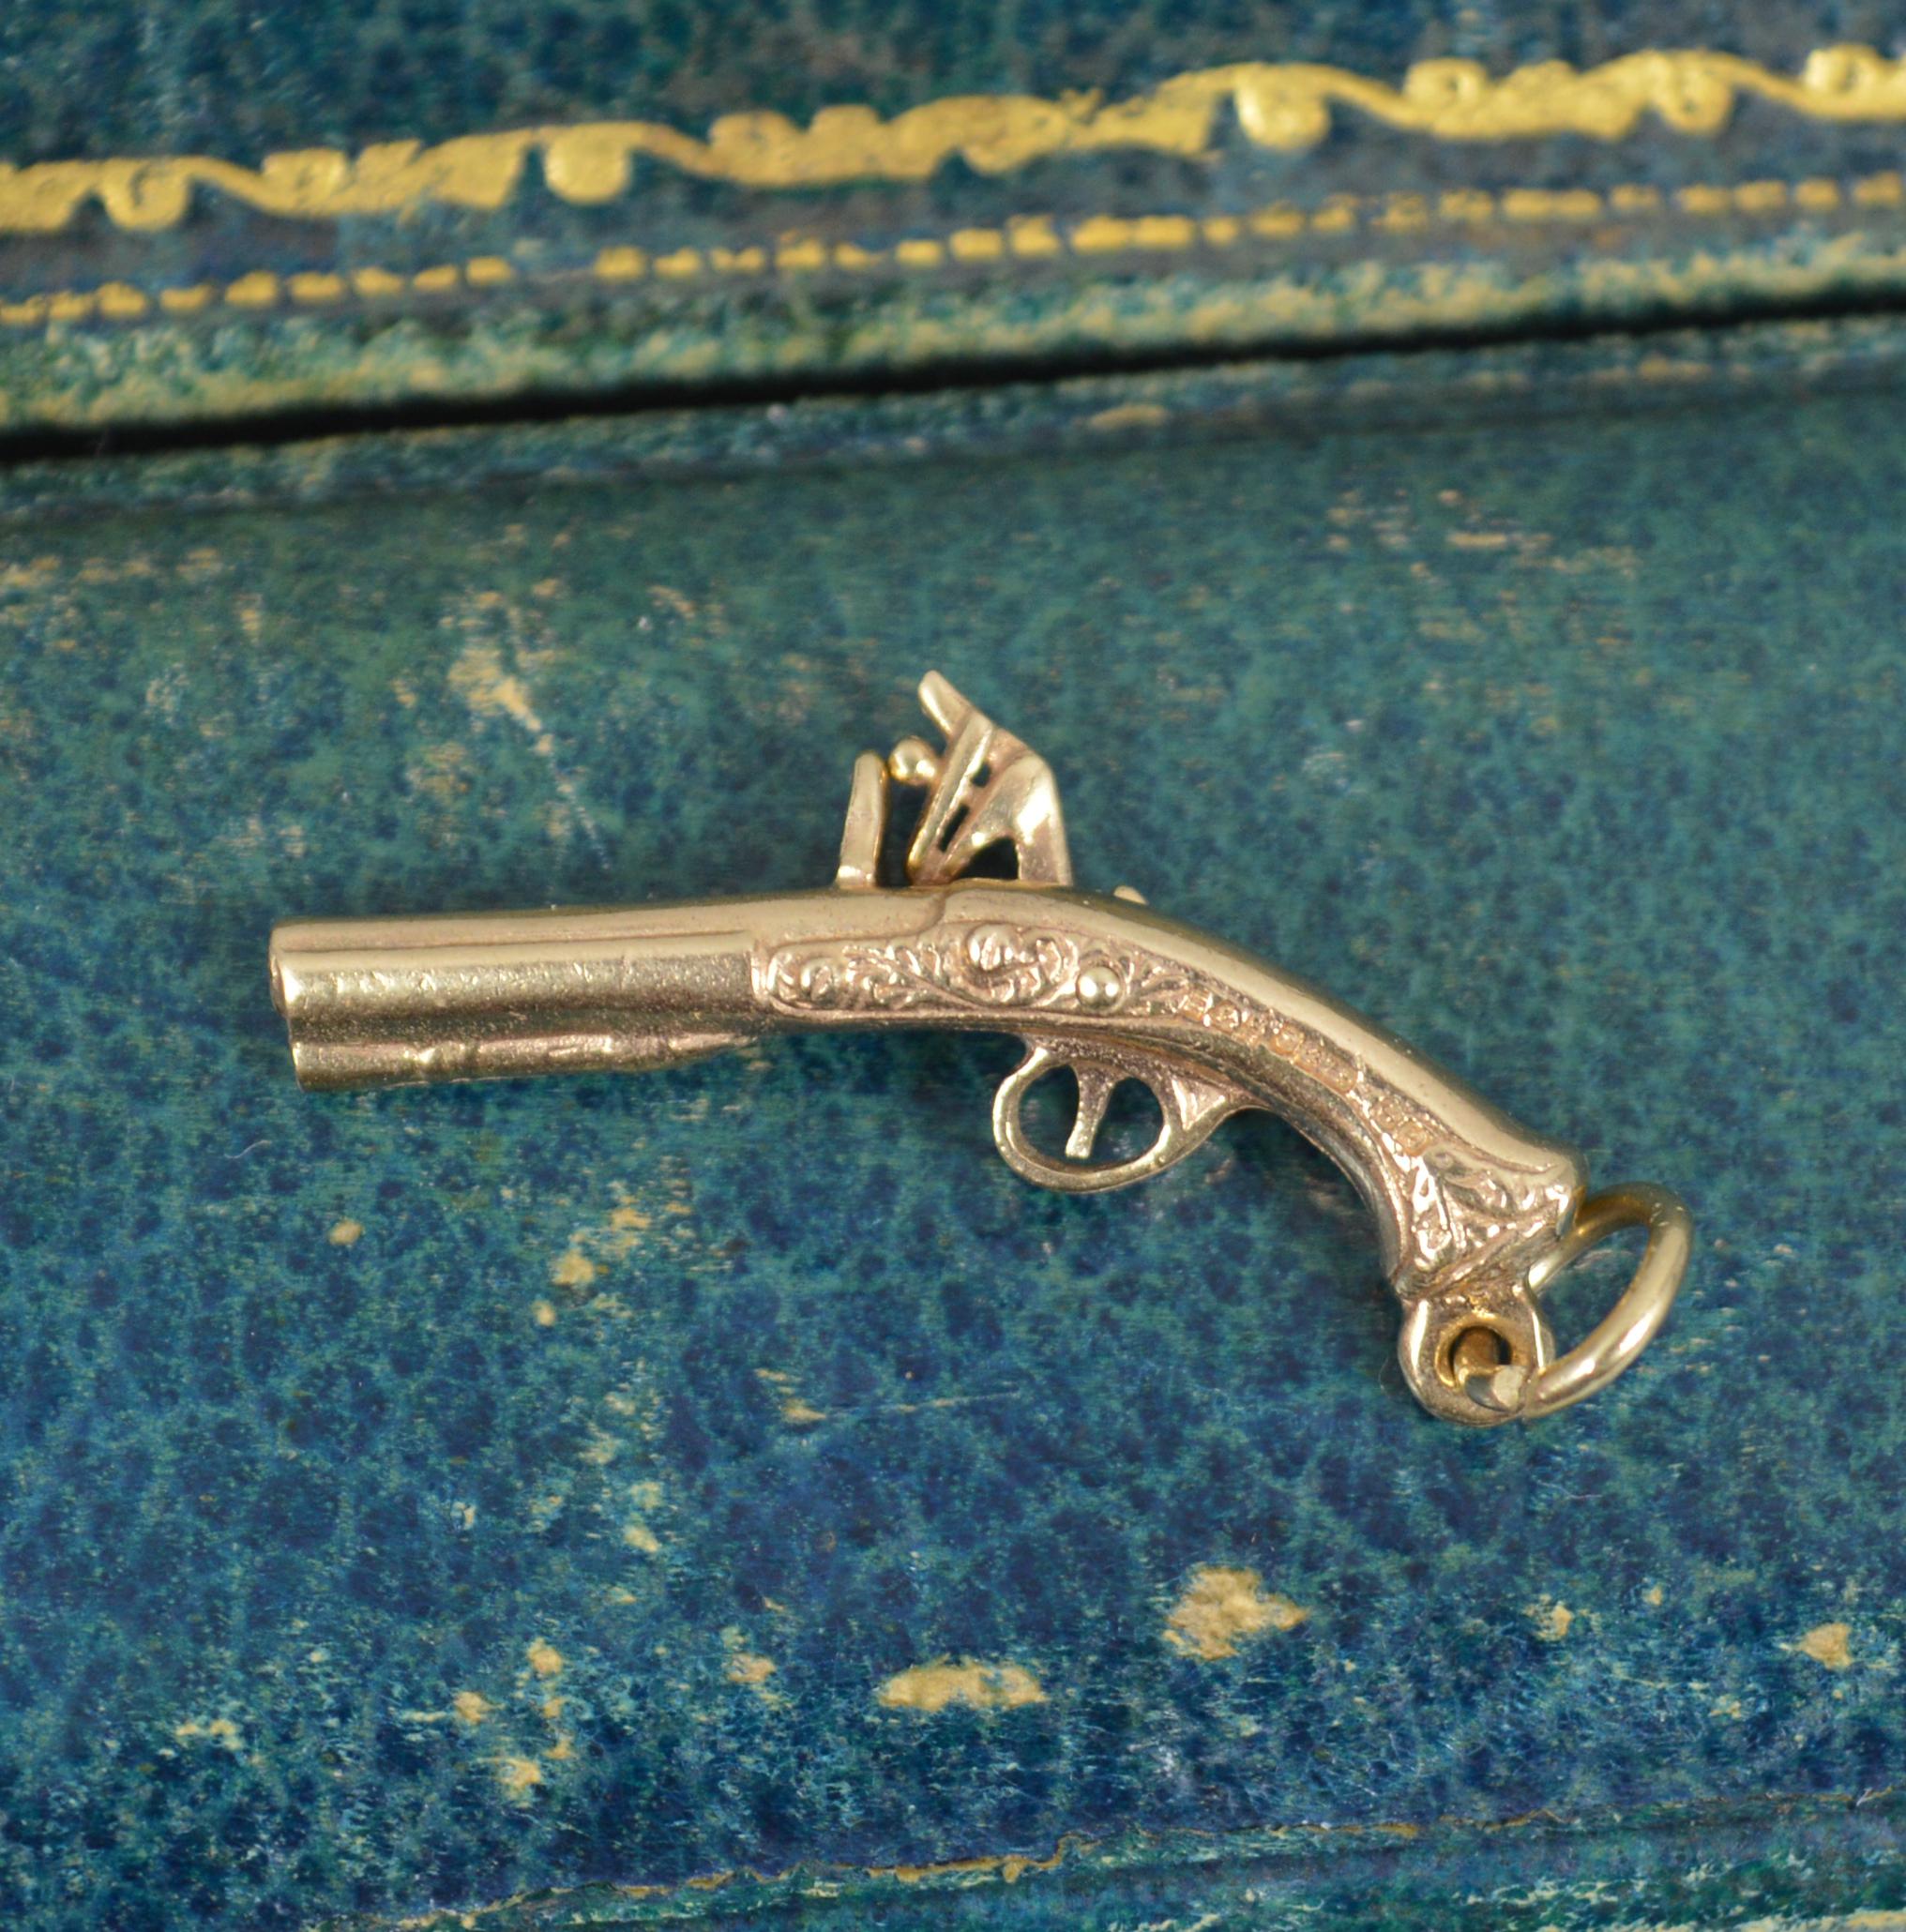 Rare Solid 9 Carat Yellow Gold Vintage Pistol Gun Pendant or Charm For Sale 1